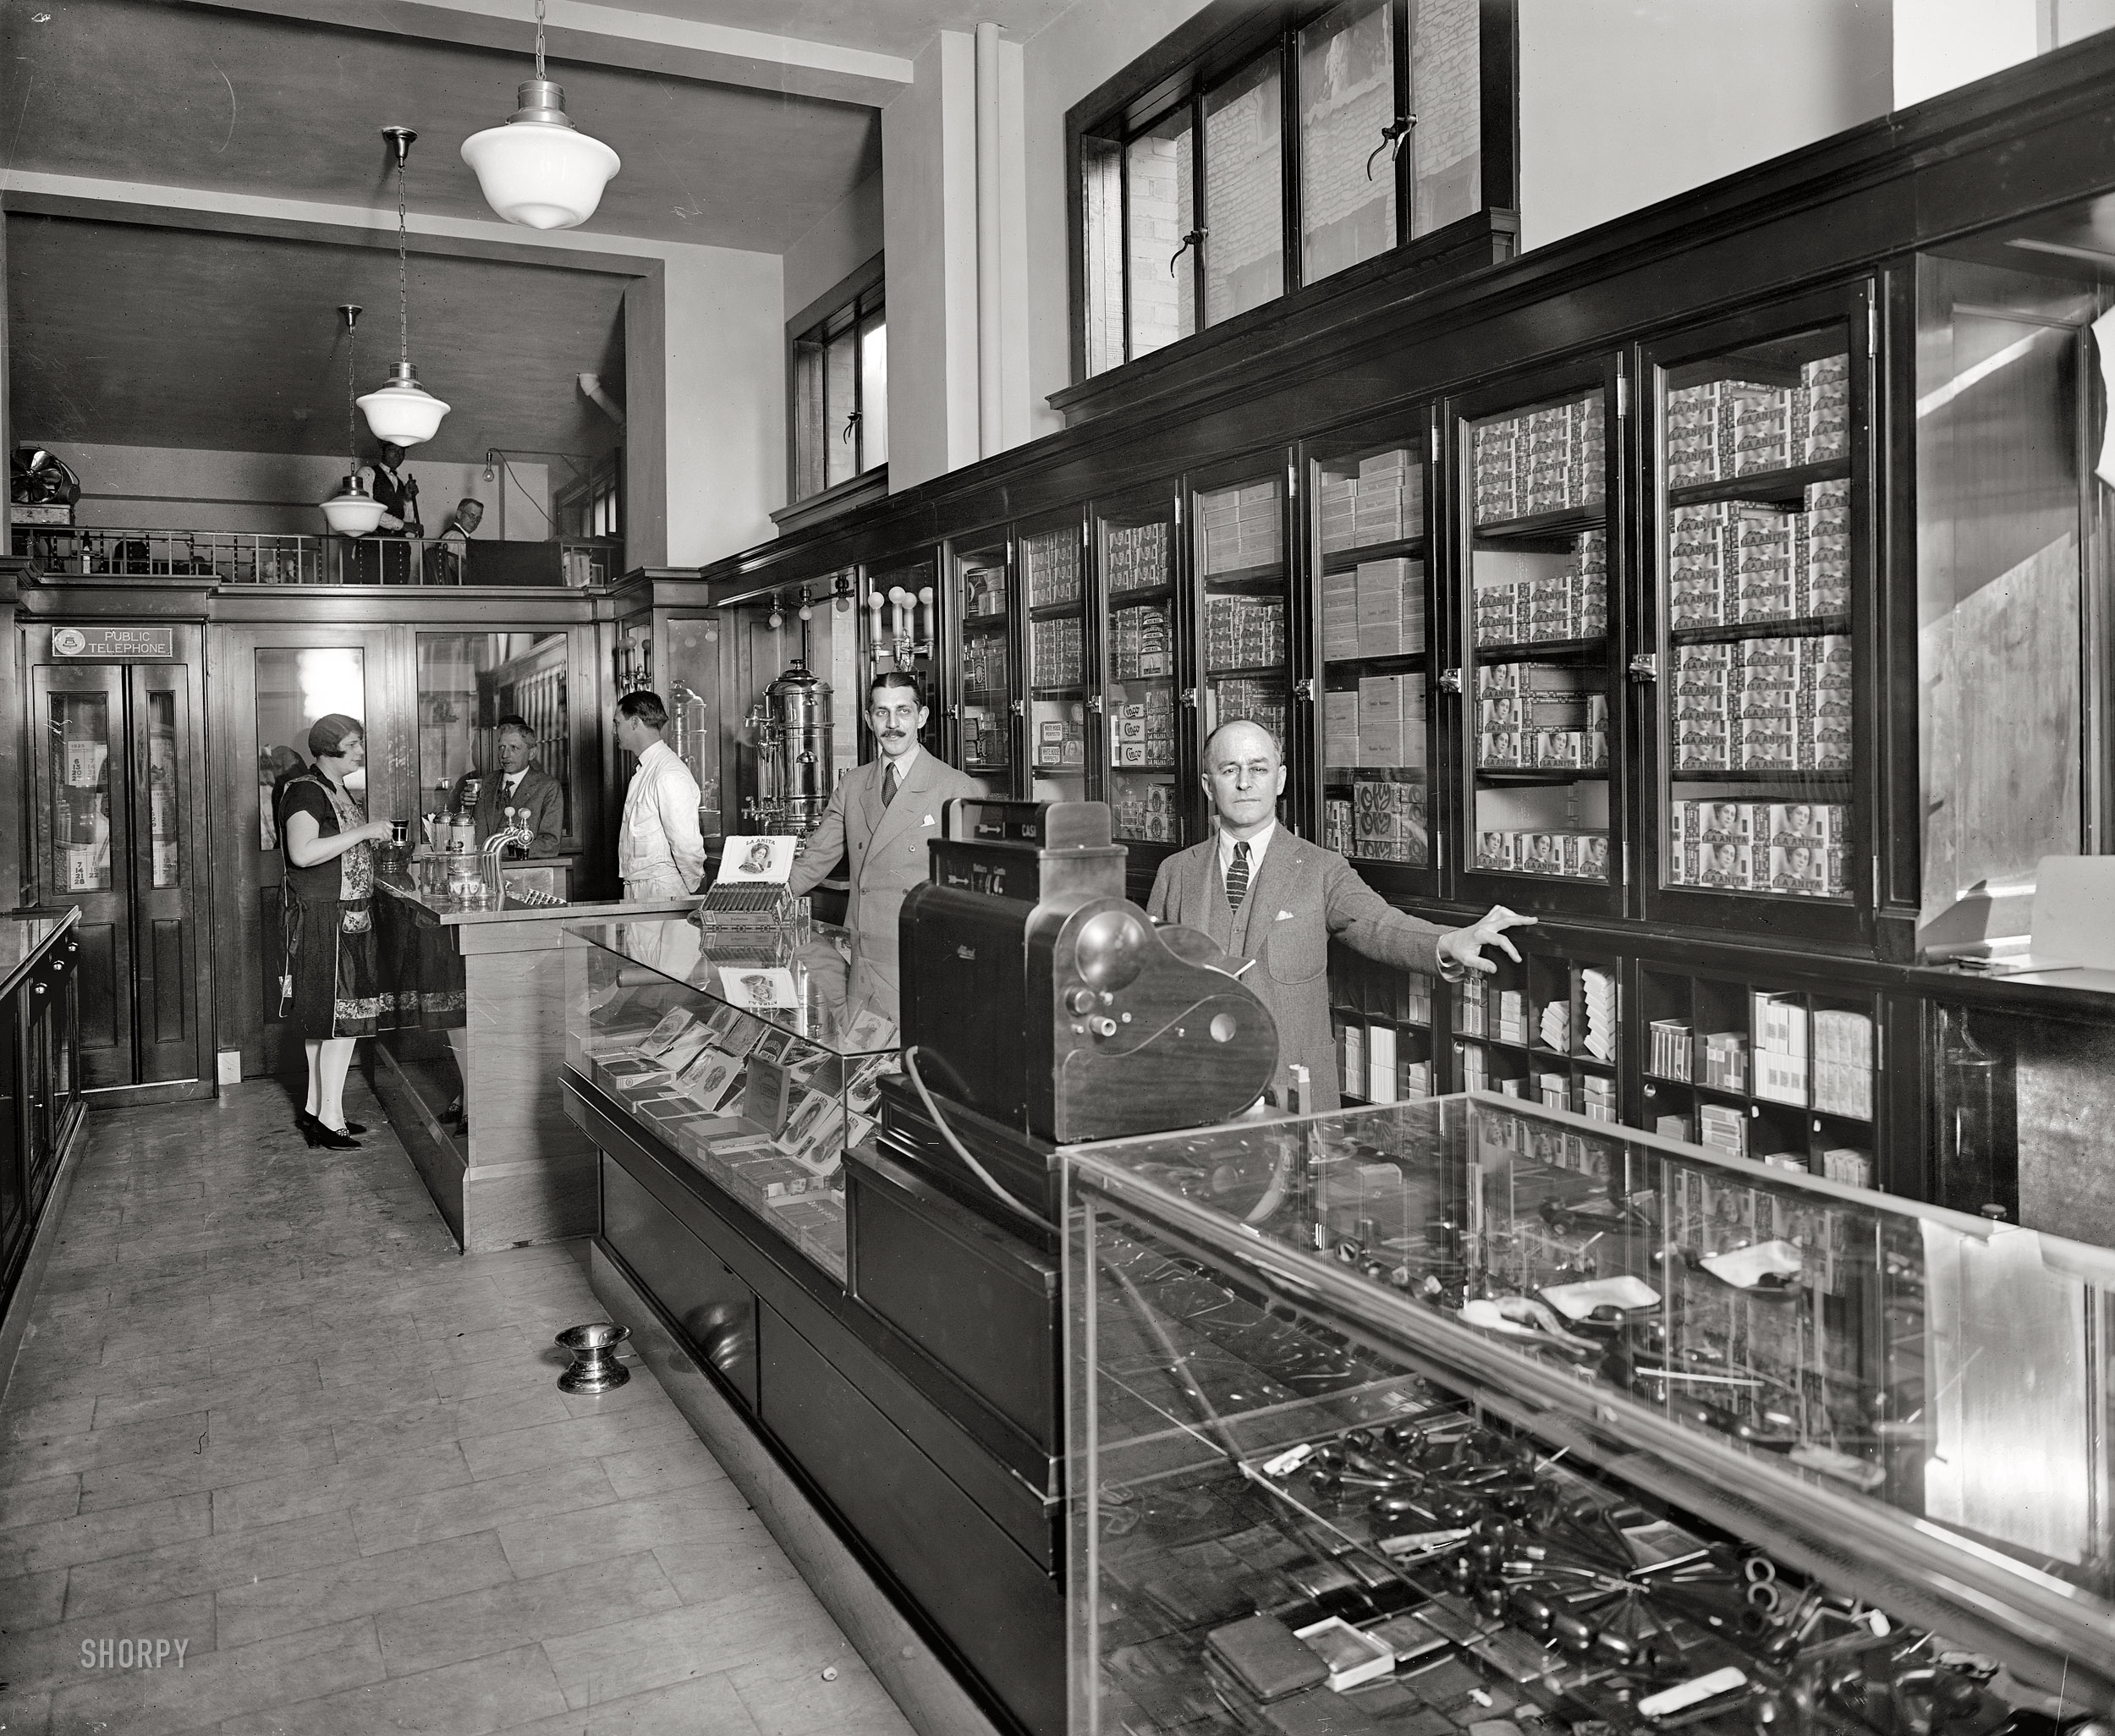 1926. Another view of the Offterdinger cigar store and soda fountain in Washington, D.C. National Photo Co. Collection glass negative. View full size.